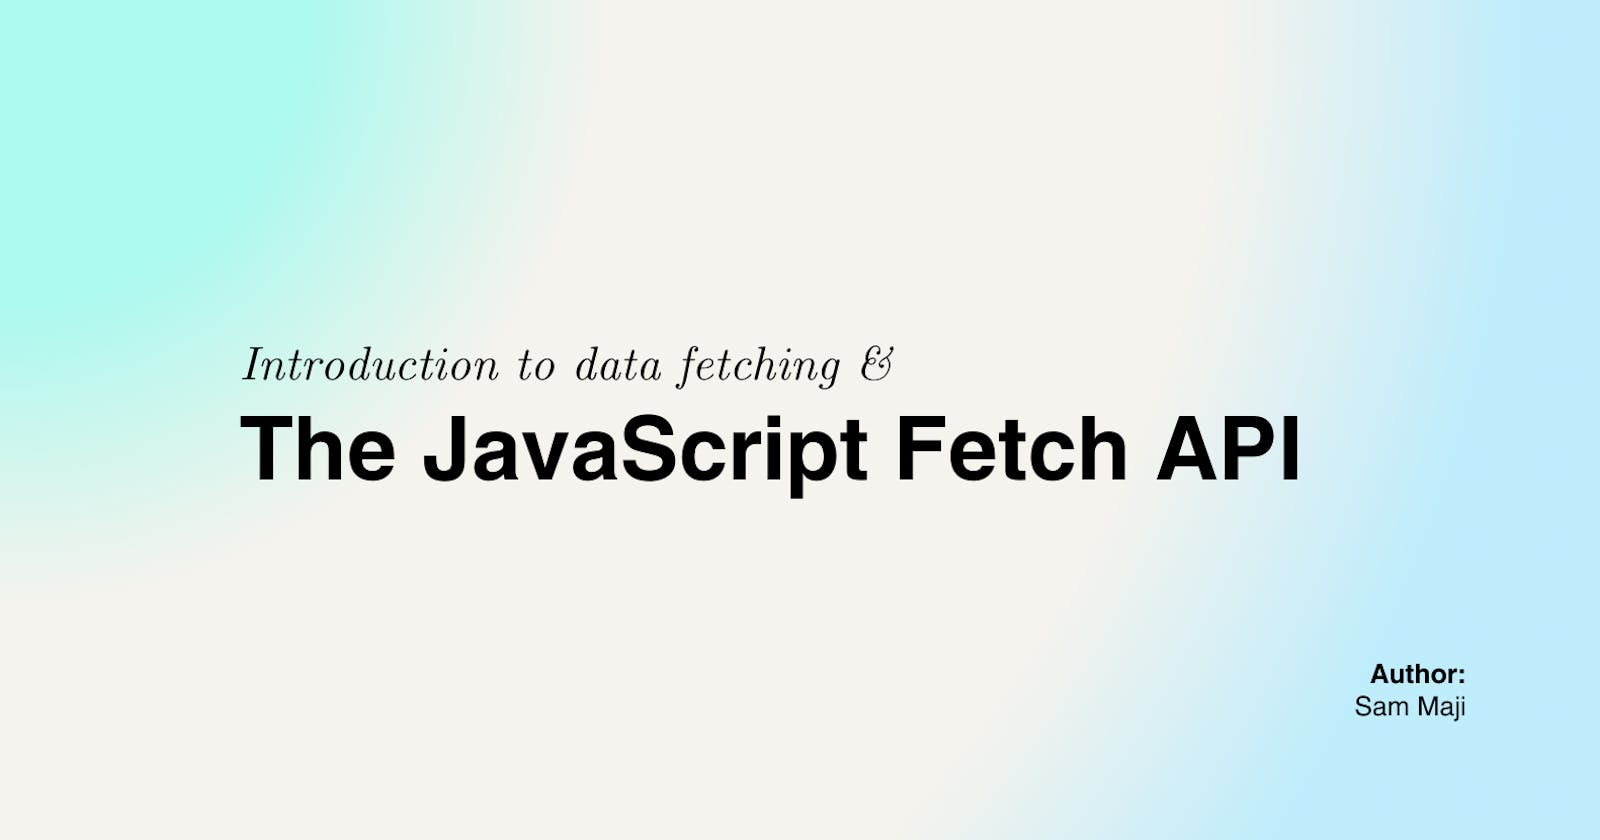 Everything about Data Fetching & the JavaScript Fetch API.